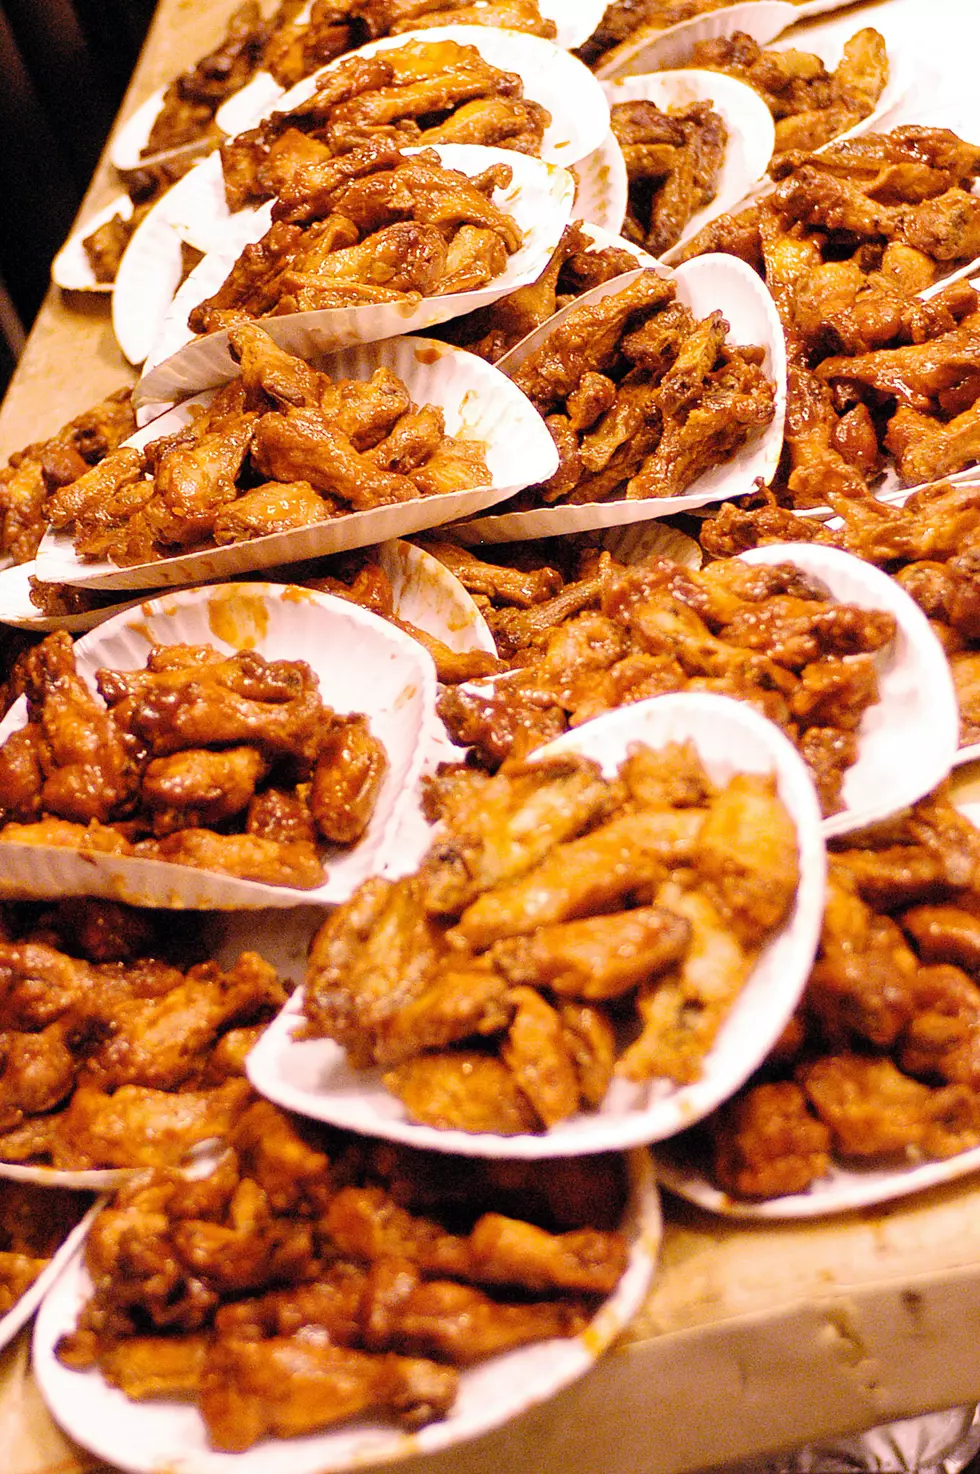 Get Free Wings Here For National Chicken Wing Day In WNY